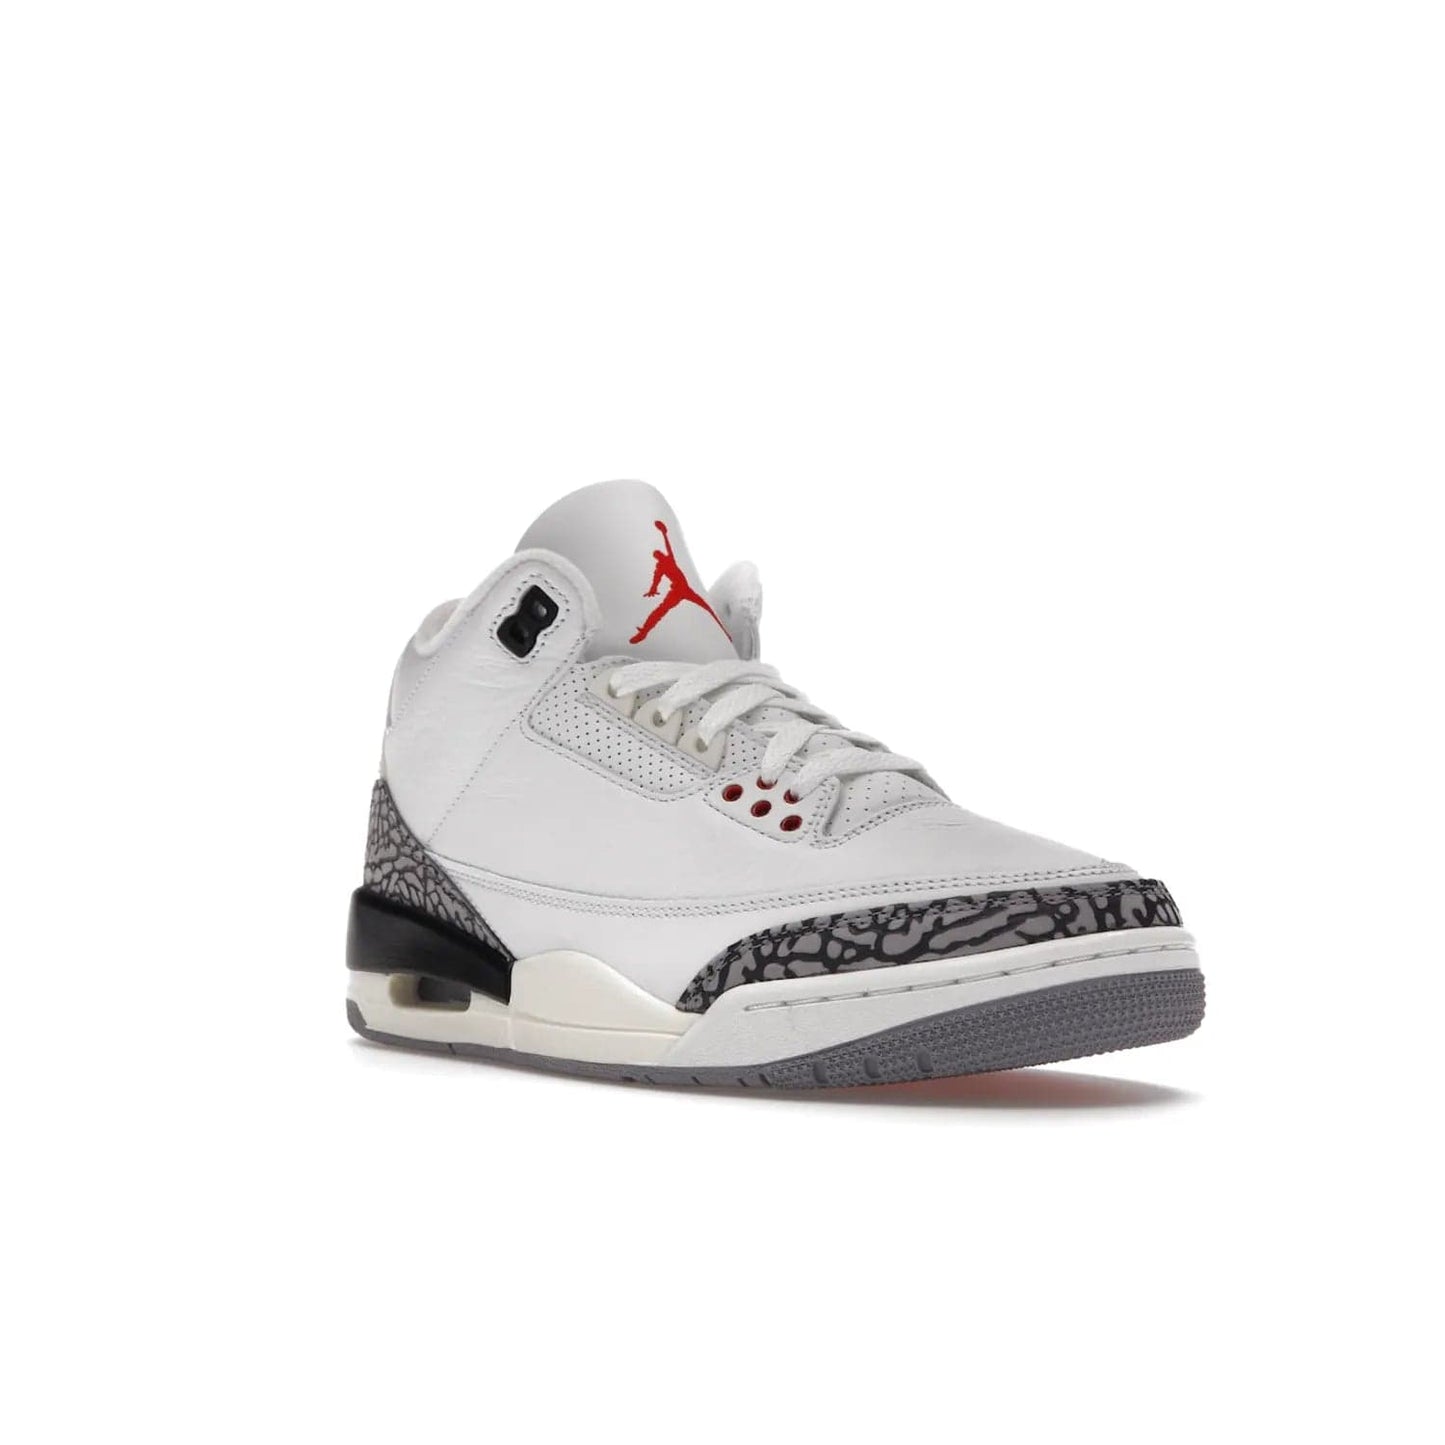 Jordan 3 Retro White Cement Reimagined - Image 6 - Only at www.BallersClubKickz.com - The Reimagined Air Jordan 3 Retro in a Summit White/Fire Red/Black/Cement Grey colorway is launching on March 11, 2023. Featuring a white leather upper, off-white midsoles and heel tabs, this vintage-look sneaker is a must-have.